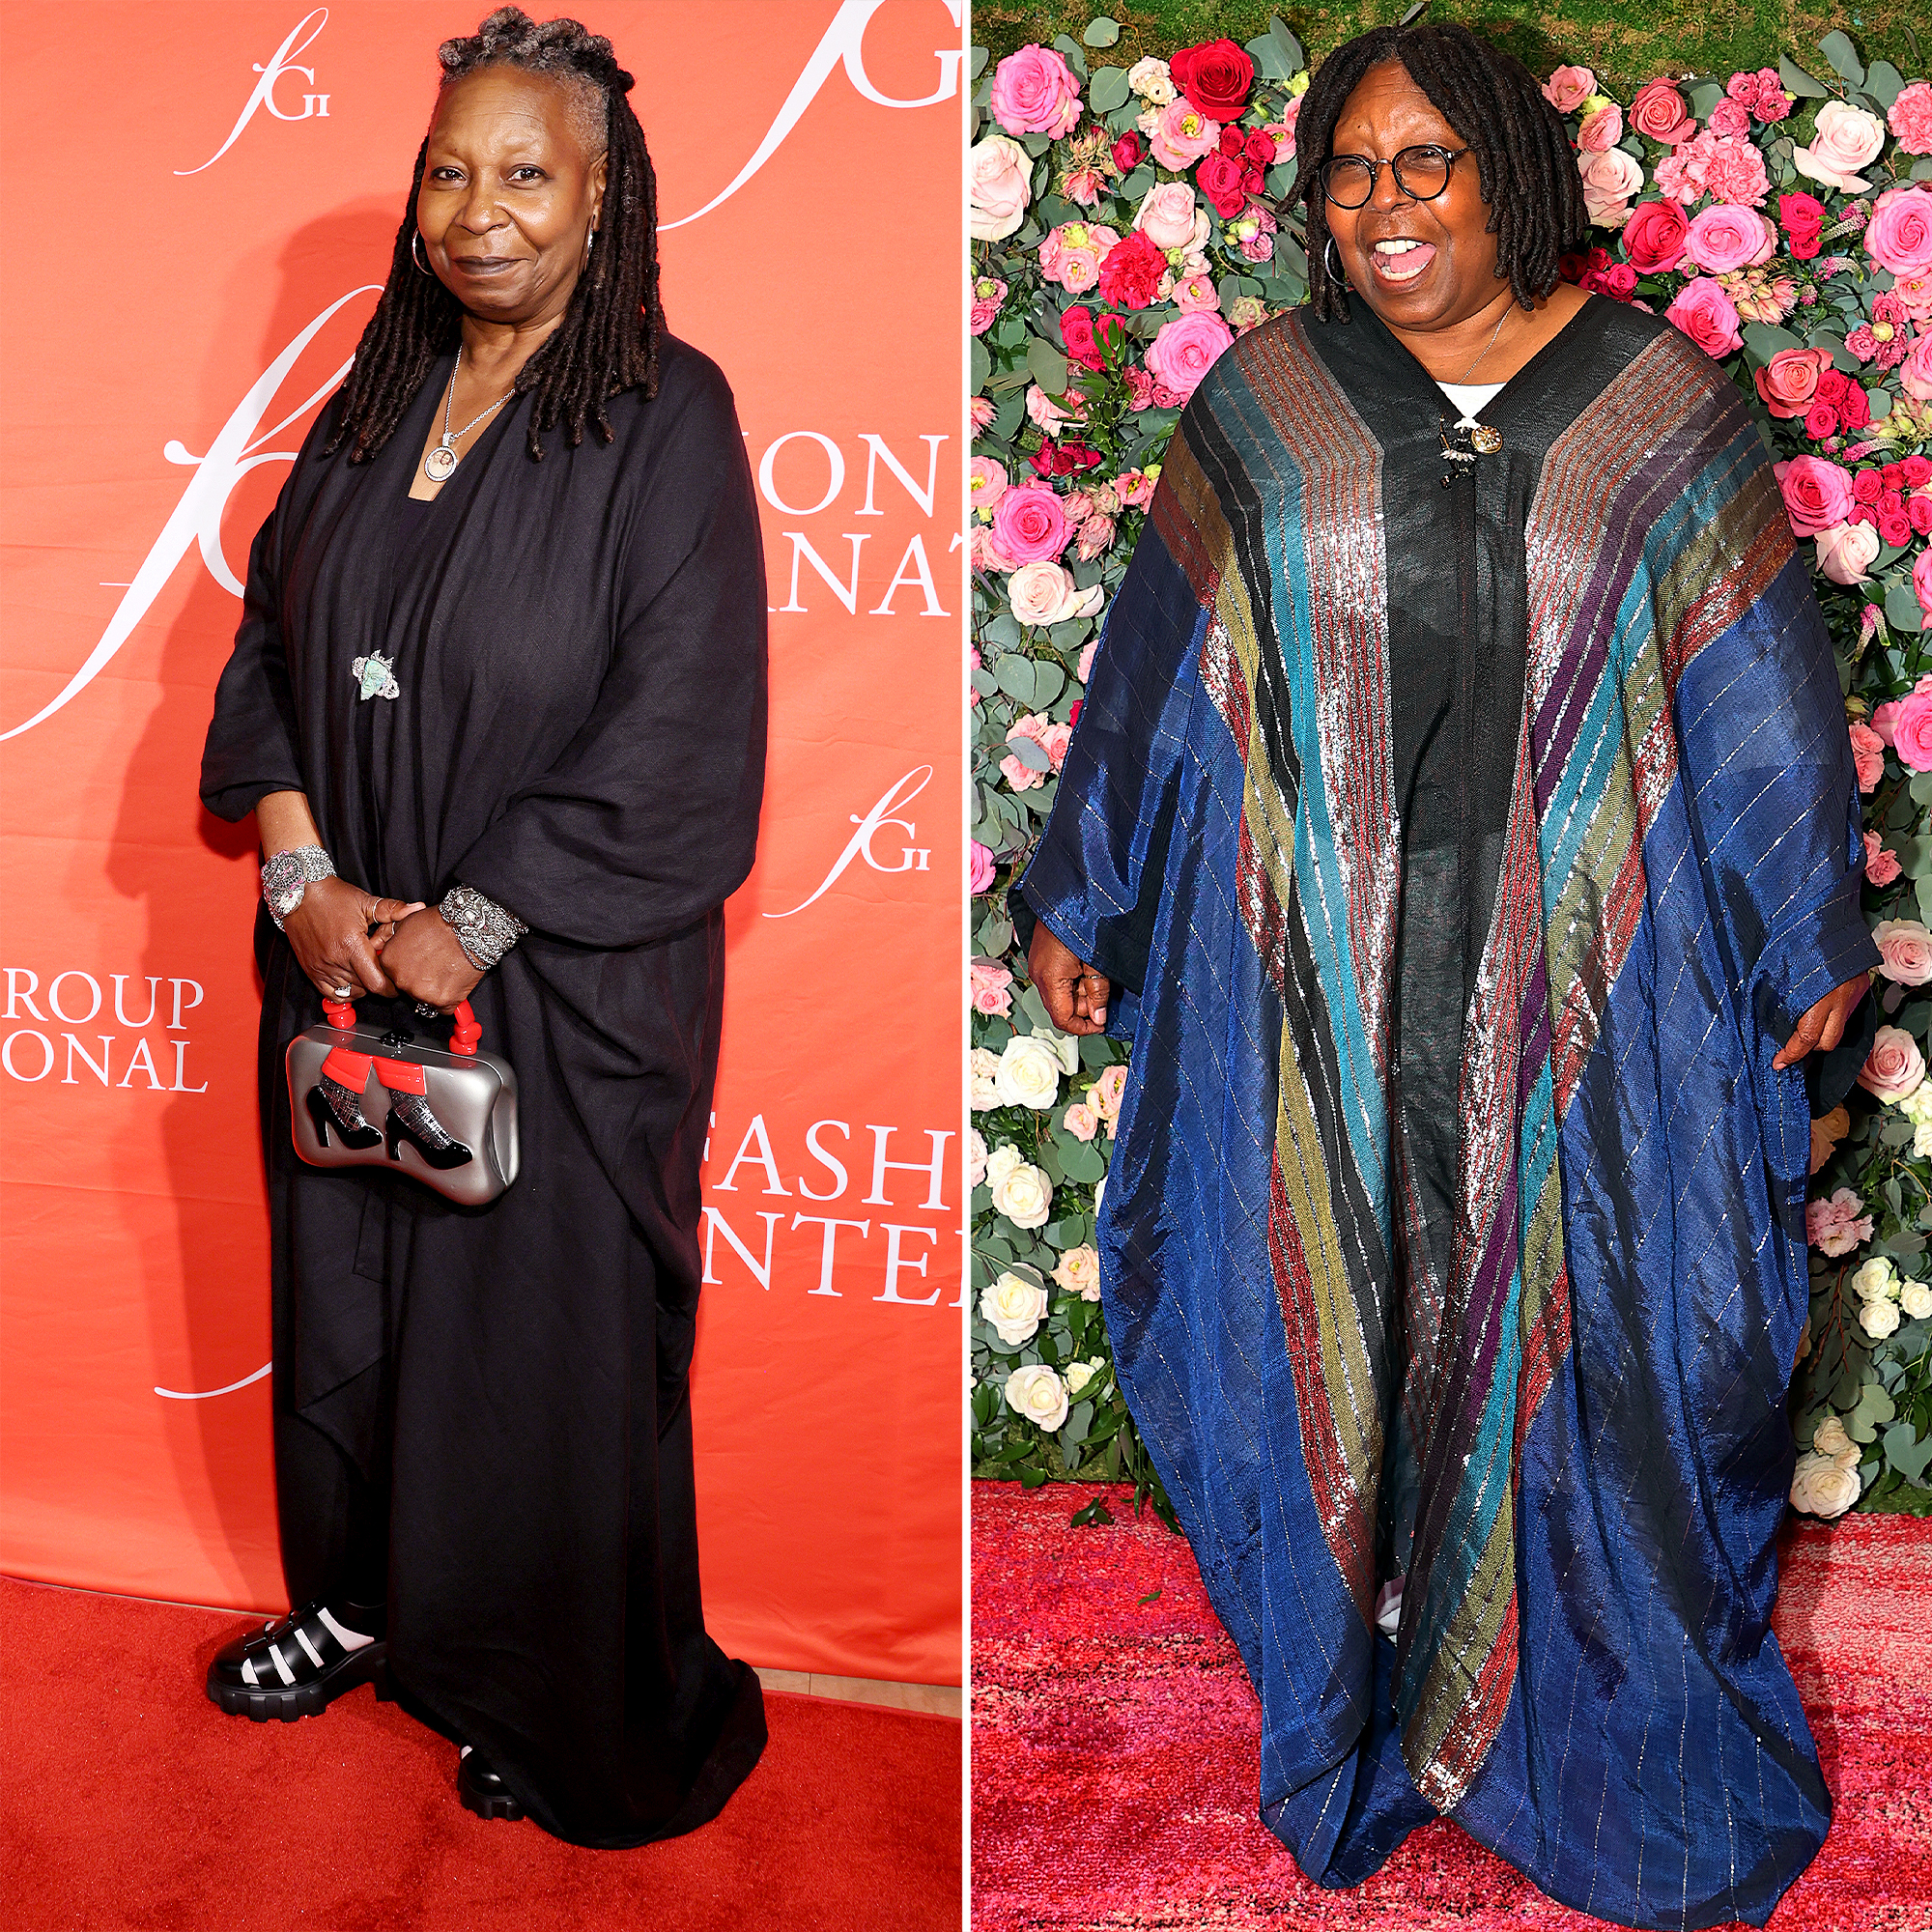 Whoopi Goldberg Weighed ‘Almost 300 Lbs While Filming Till in 2021